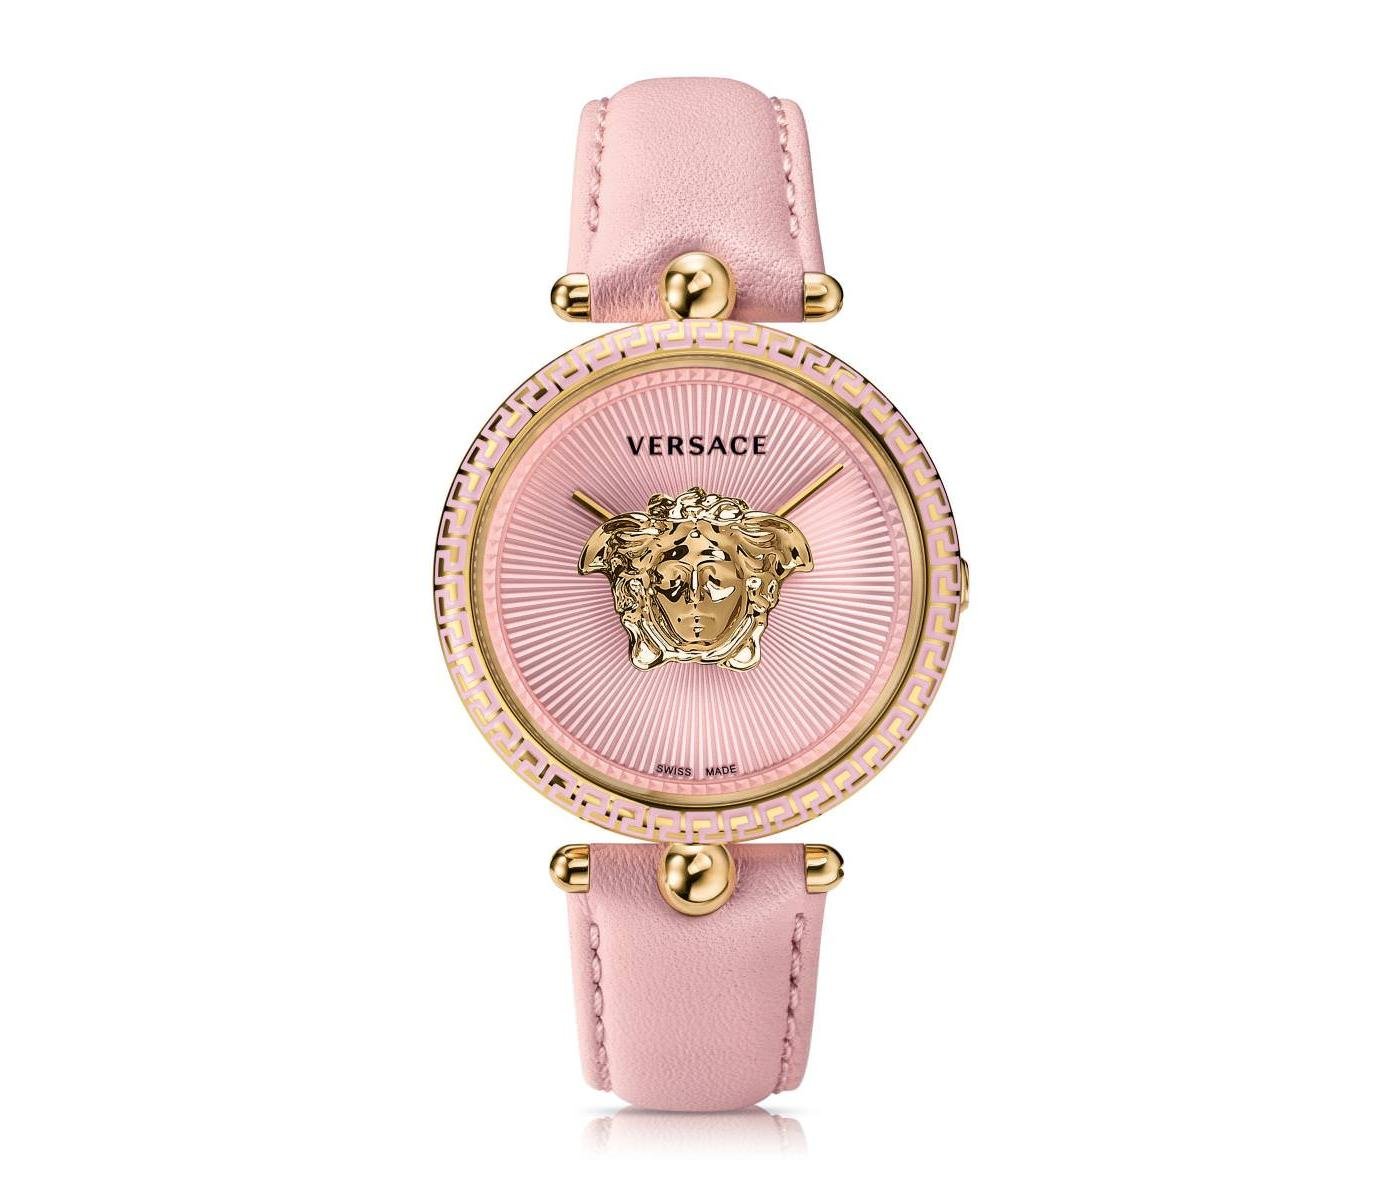 Watch by Versace